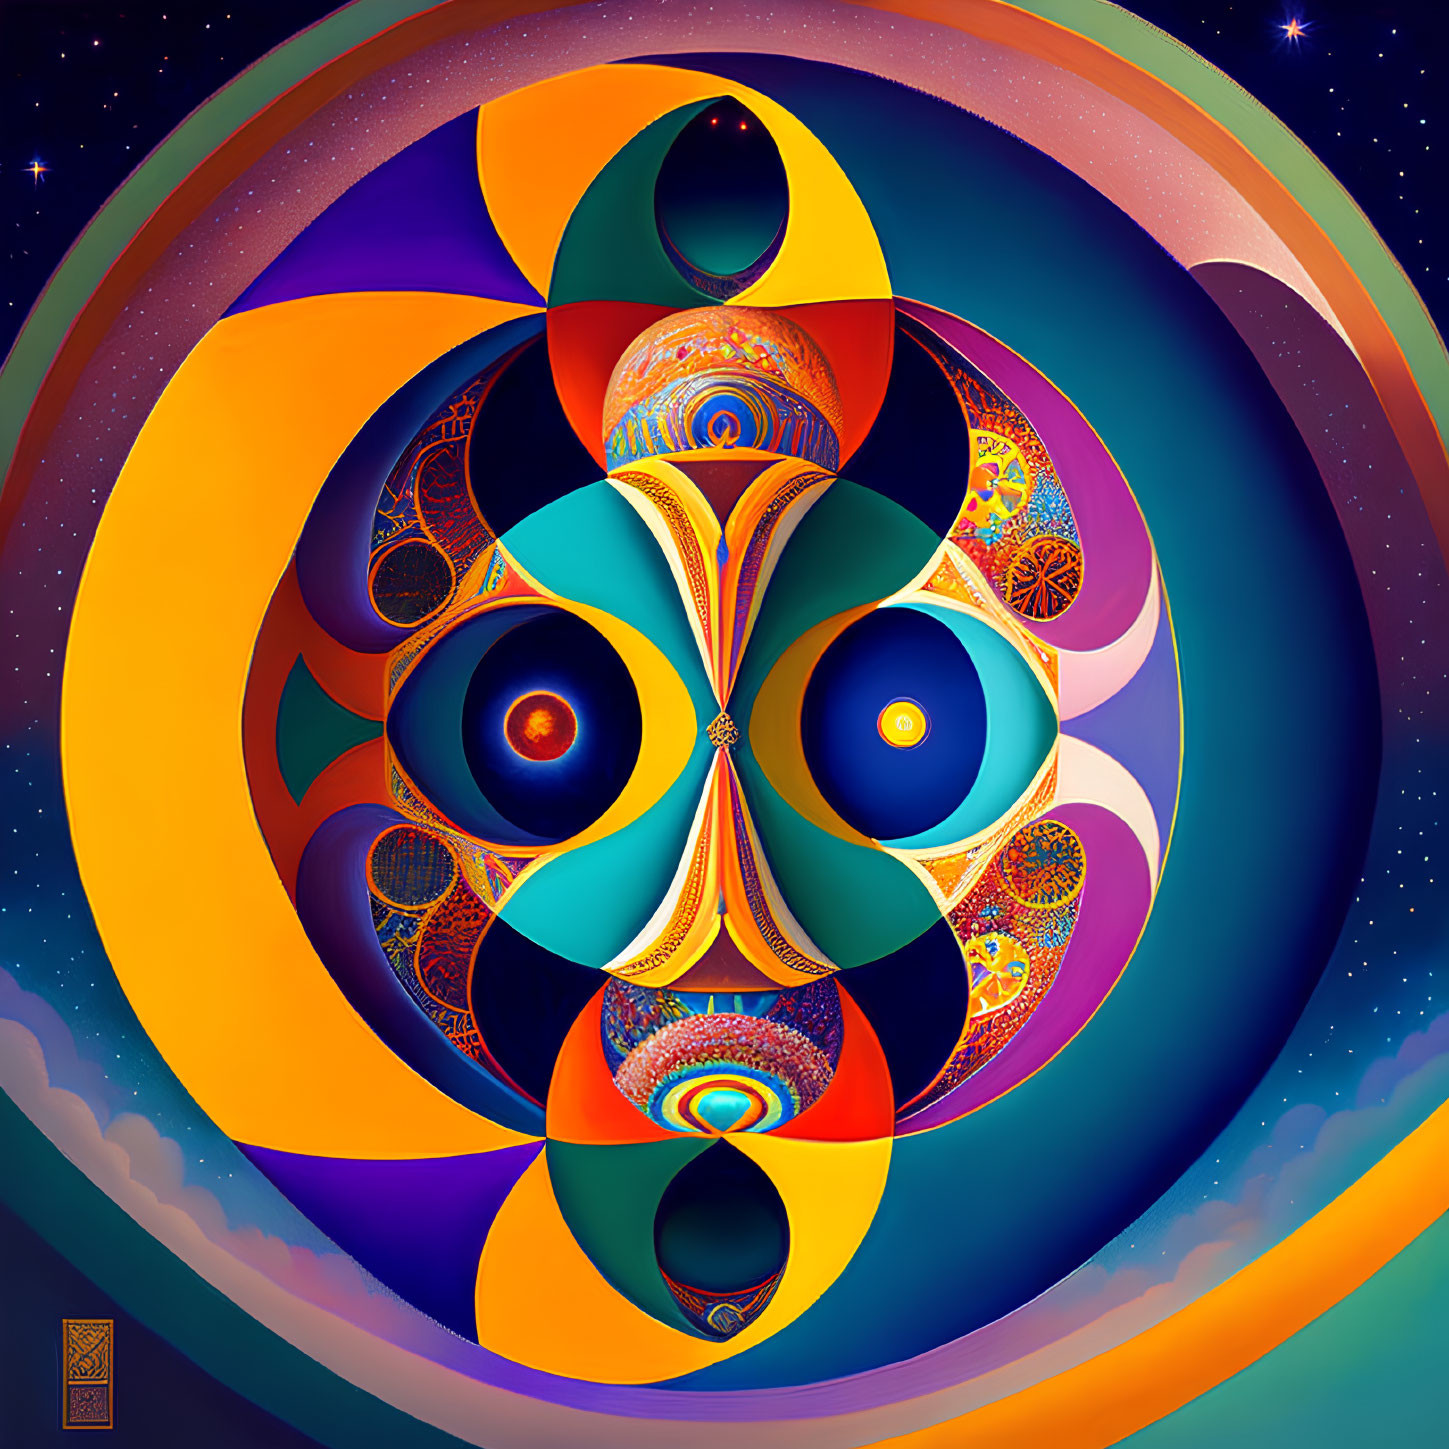 Colorful Psychedelic Artwork with Eye Motif and Celestial Theme